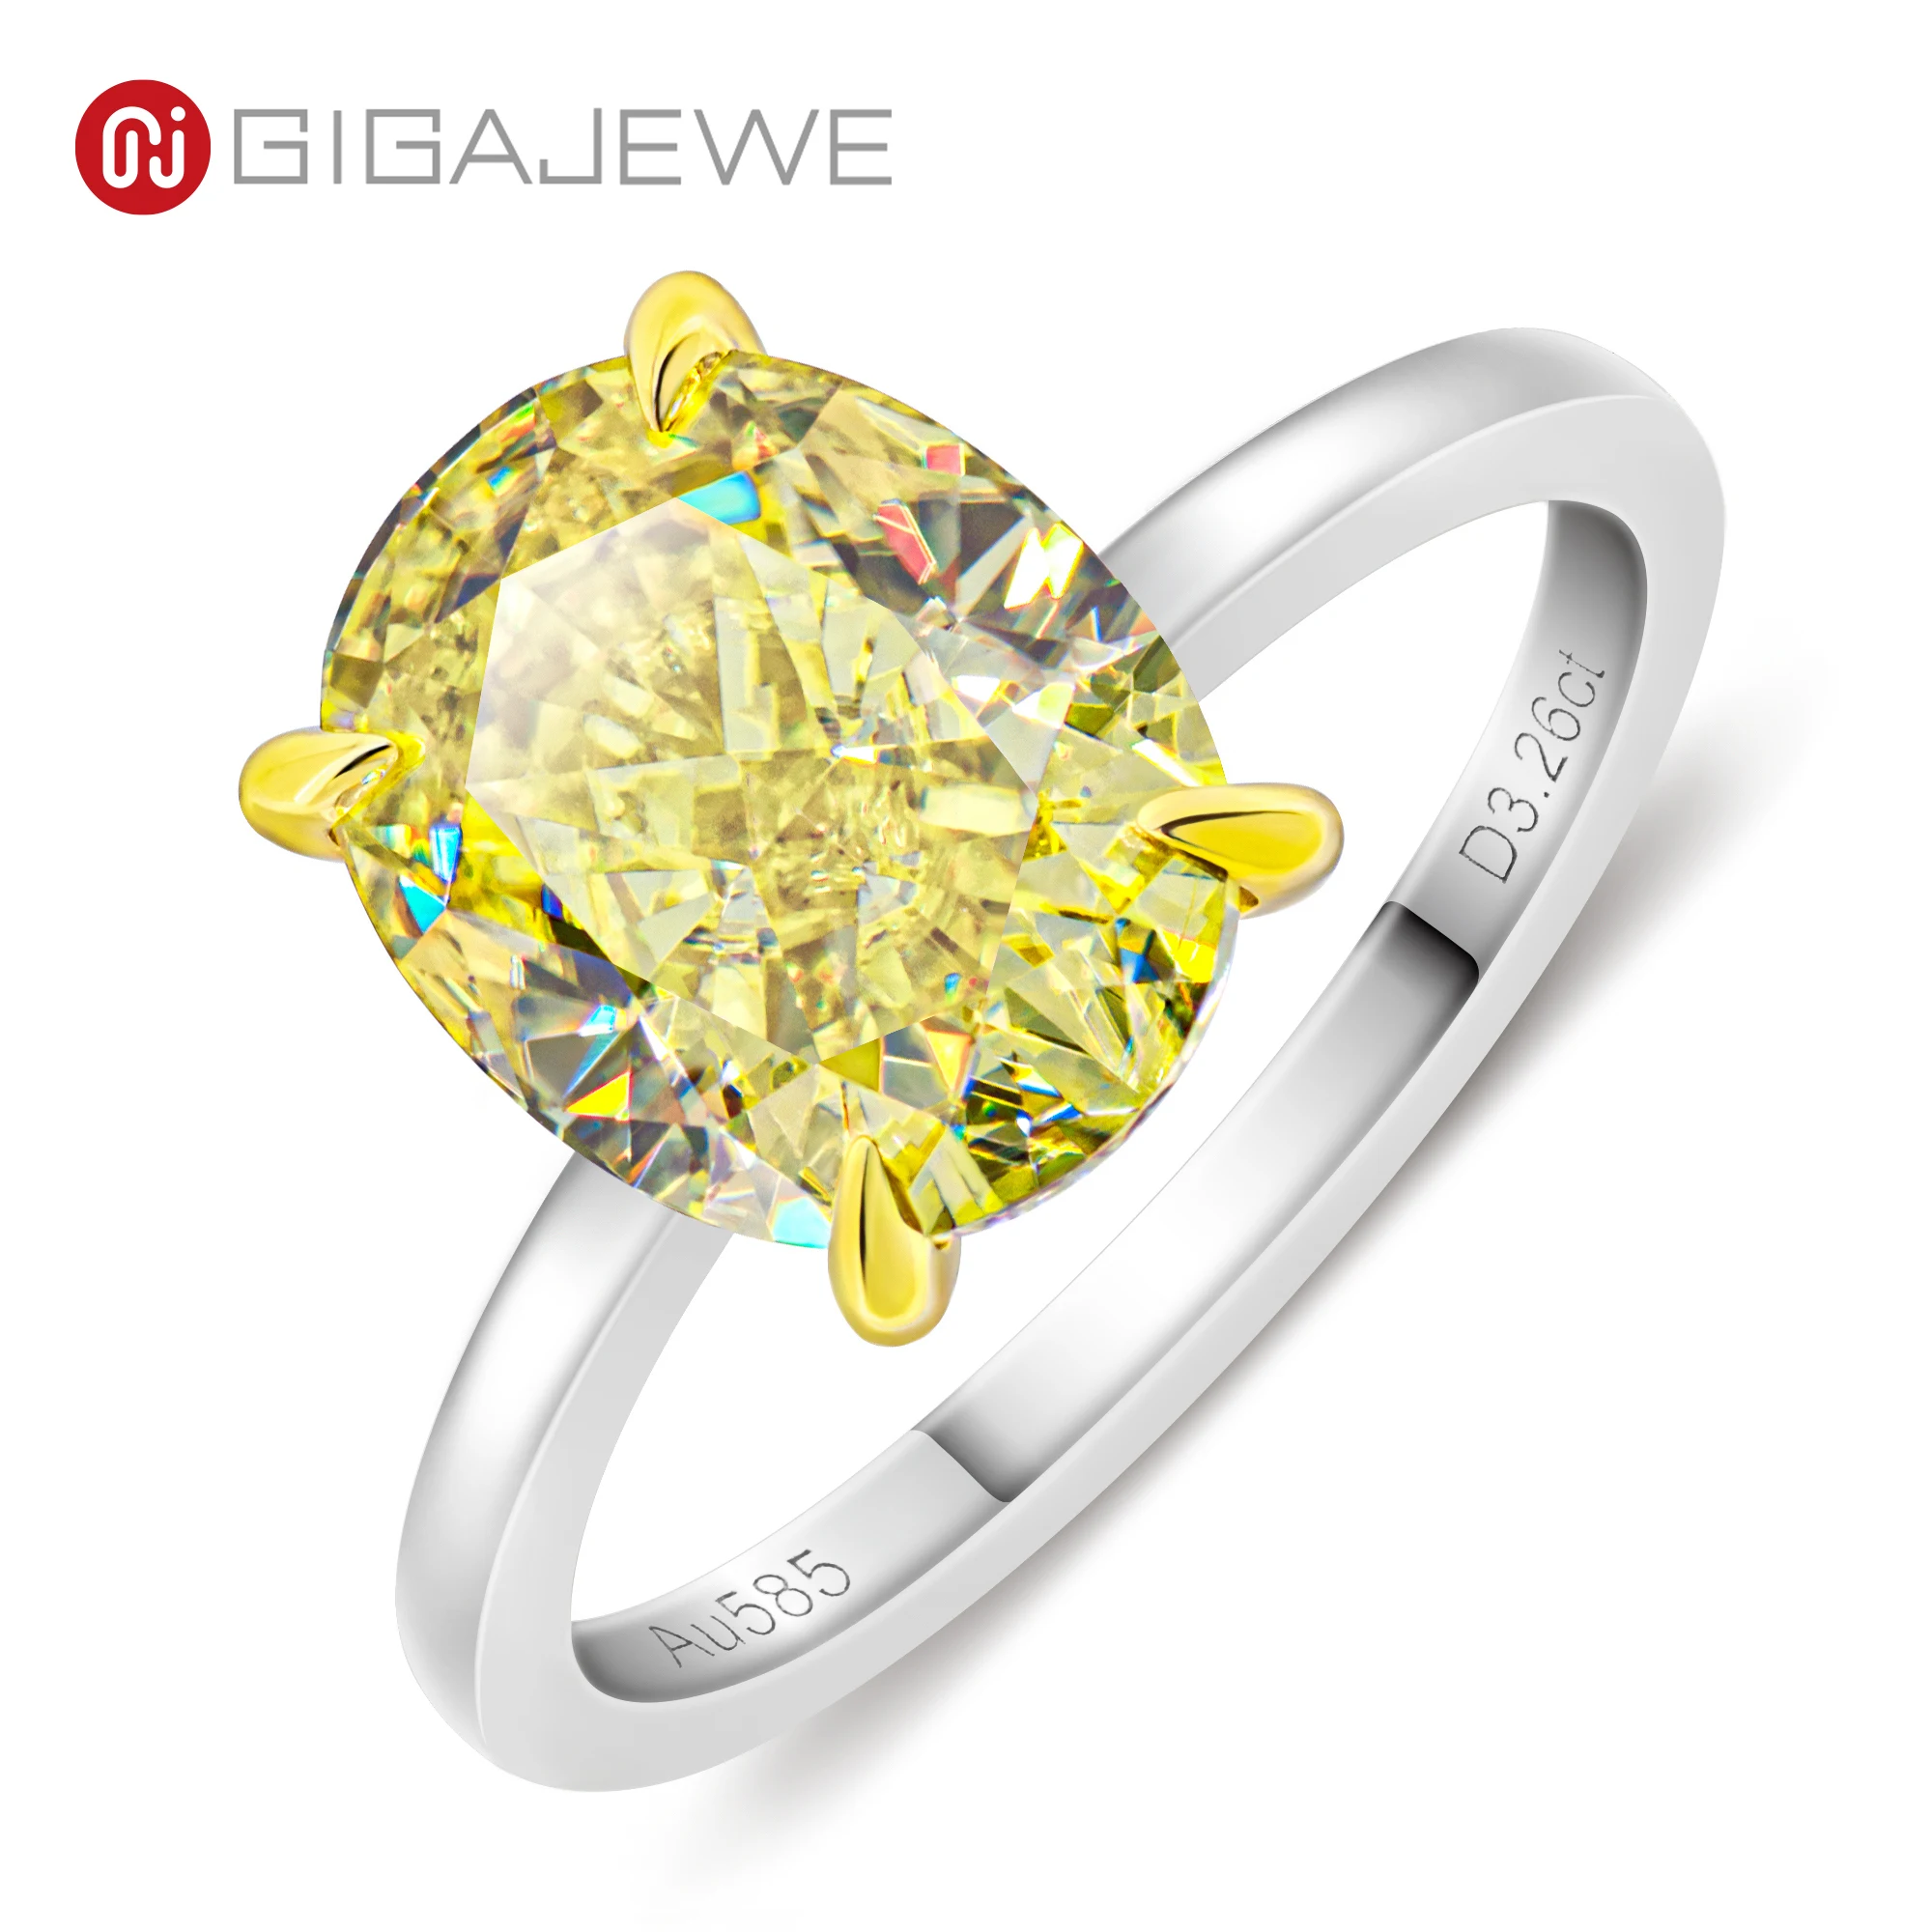 

GIGAJEWE 3.0ct 10x8mm Vivid Yellow Color Moissanite VVS1 Crushed Ice Oval Cut 18K White Gold Ring Jewelry Woman Girlfriend Gift